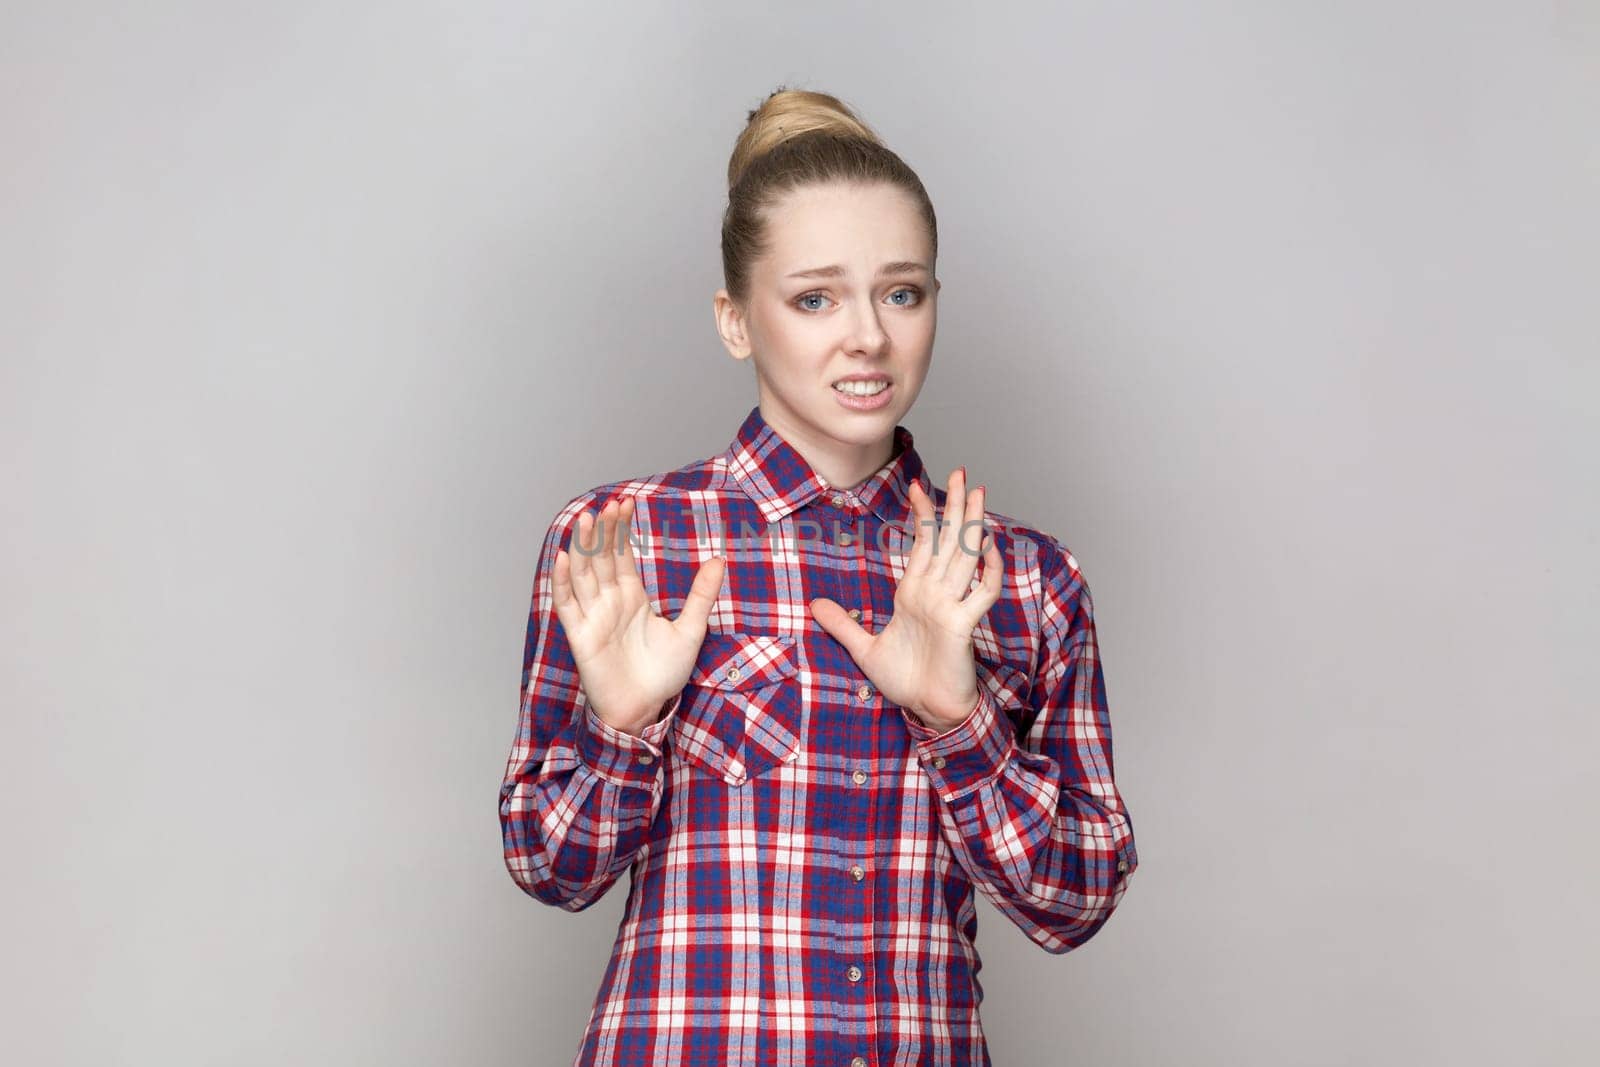 Portrait of scared frighten beautiful woman with bun hairstyle standing looking at camera, showing stop signs, being afraid, wearing checkered shirt. Indoor studio shot isolated on gray background.